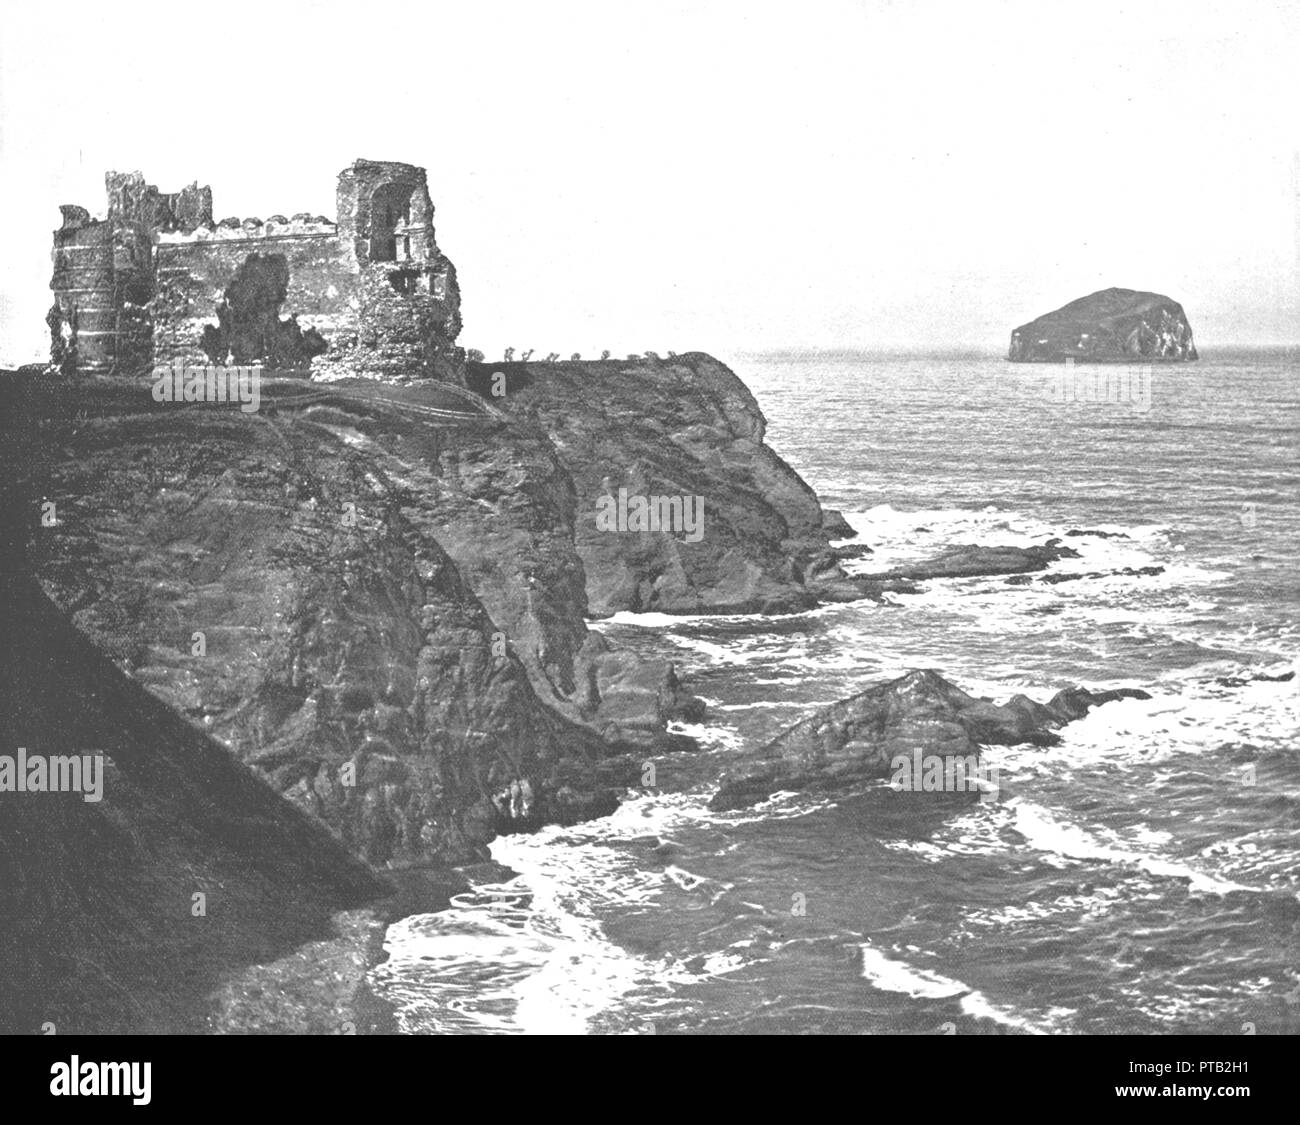 Beautiful ruined castle Black and White Stock Photos & Images - Alamy